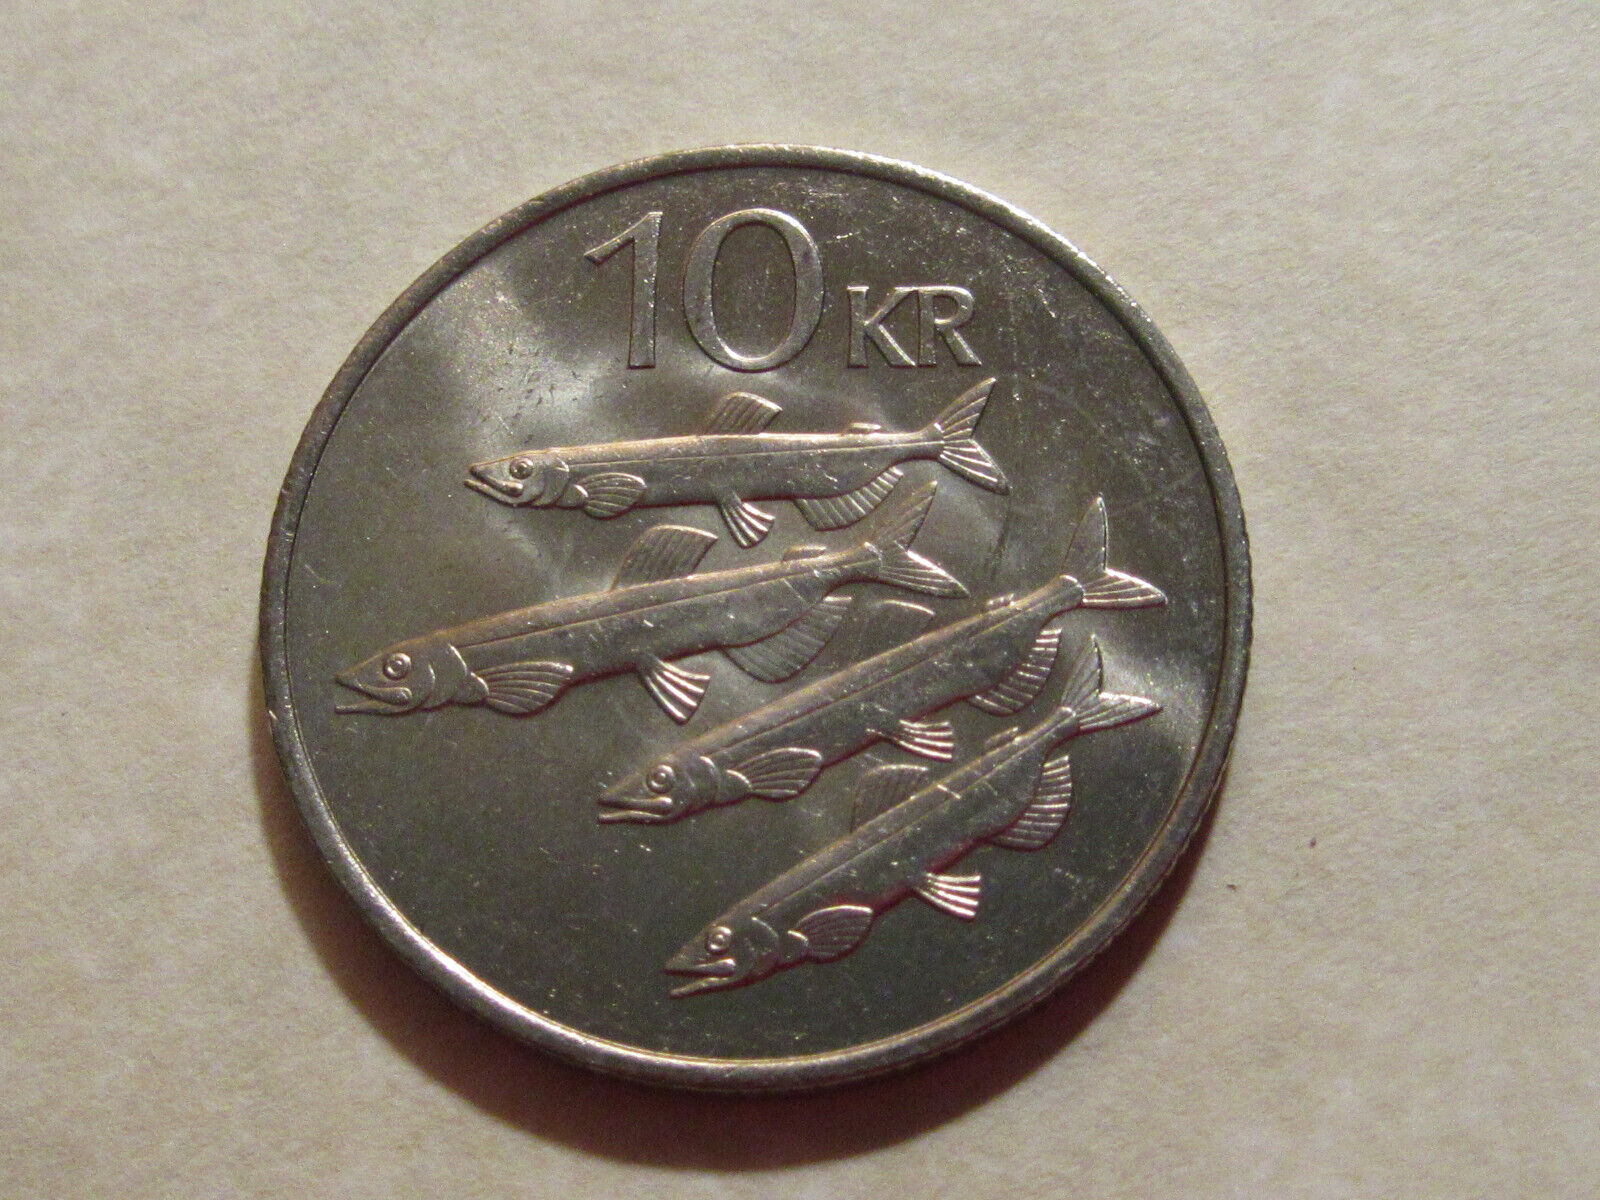 1984 Iceland Coin  10 Kroner   Capelin Fish   Unc  Beauties  Animal Coin